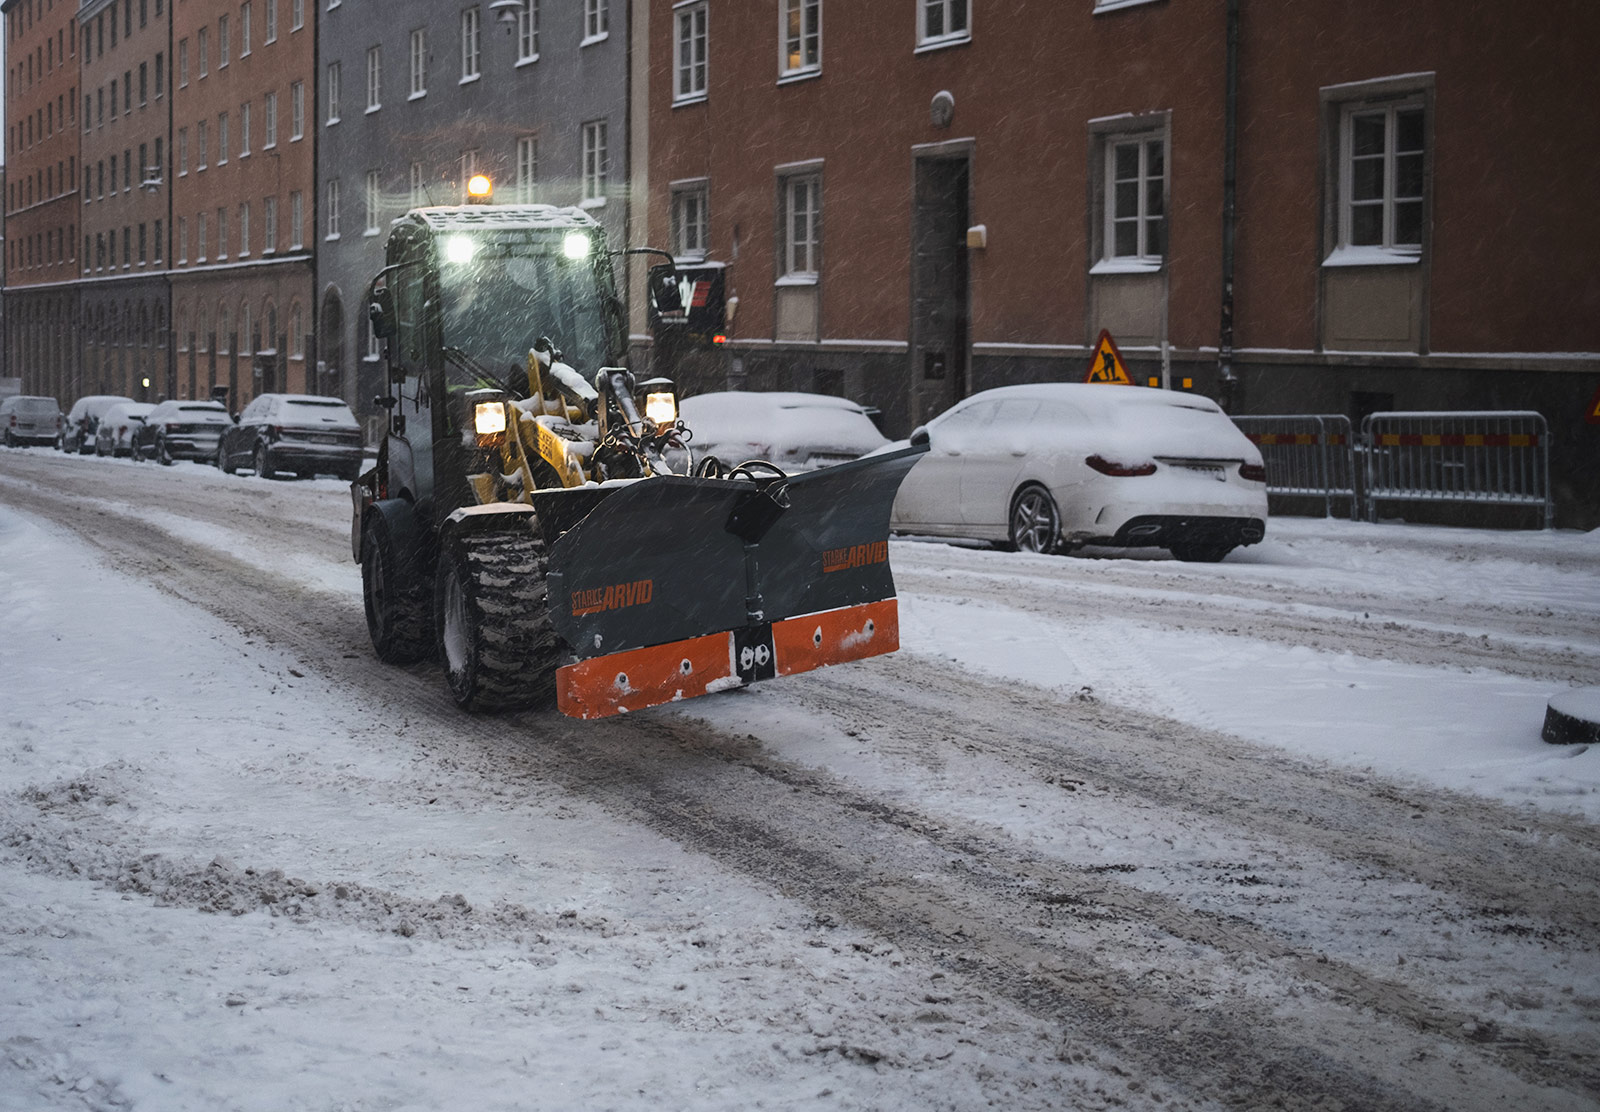 Snowplough on the road